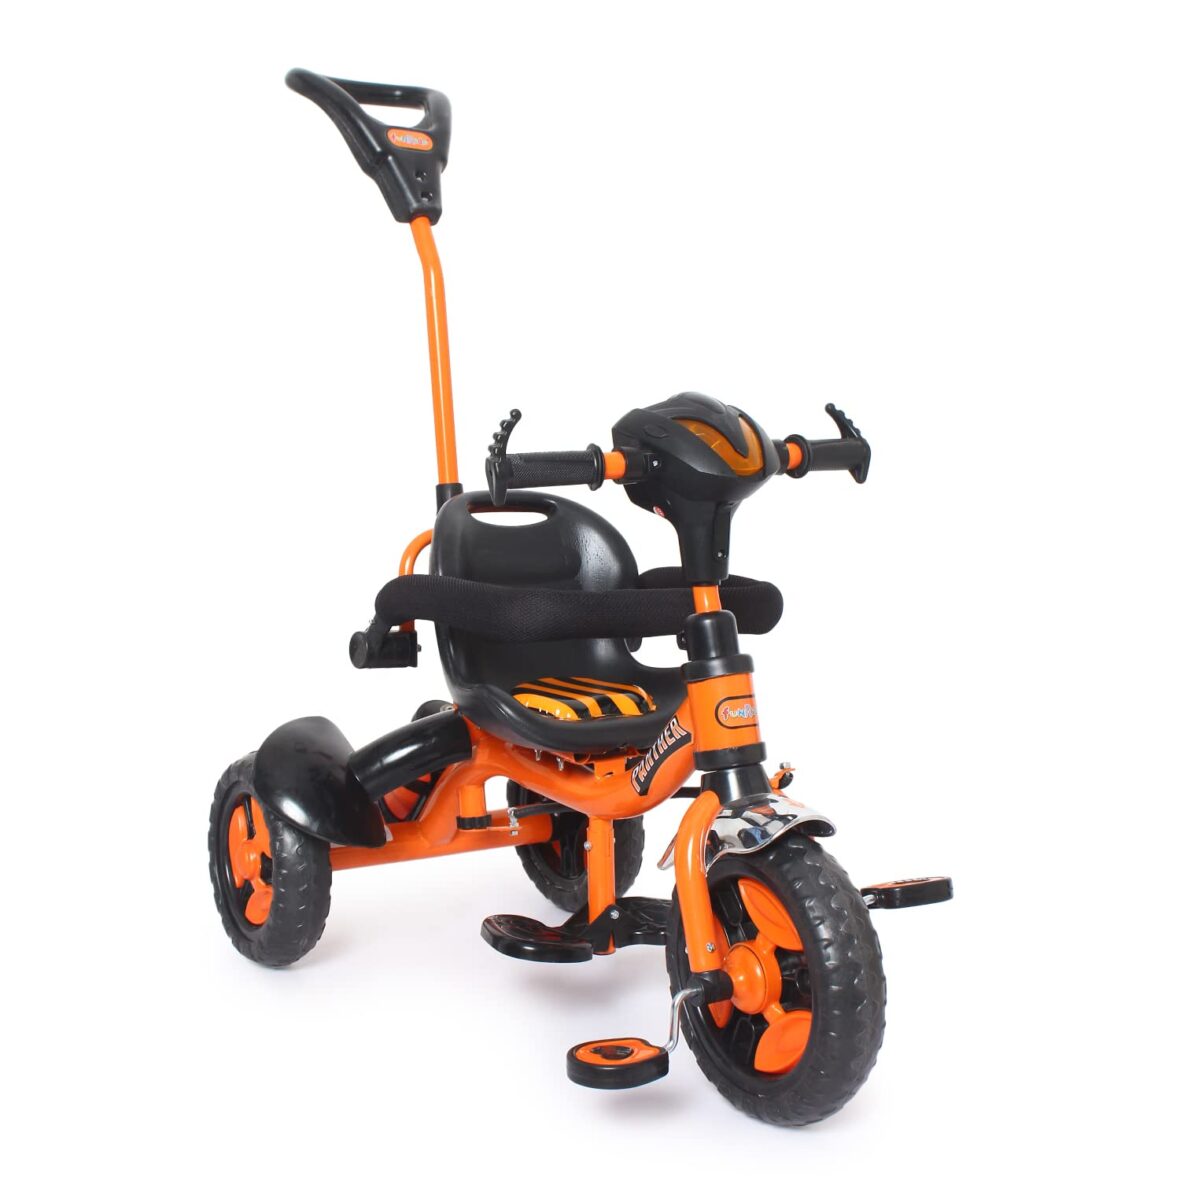 FunRide Kids Tricycle Rider Panther with Removable Parental Control Handle (19)